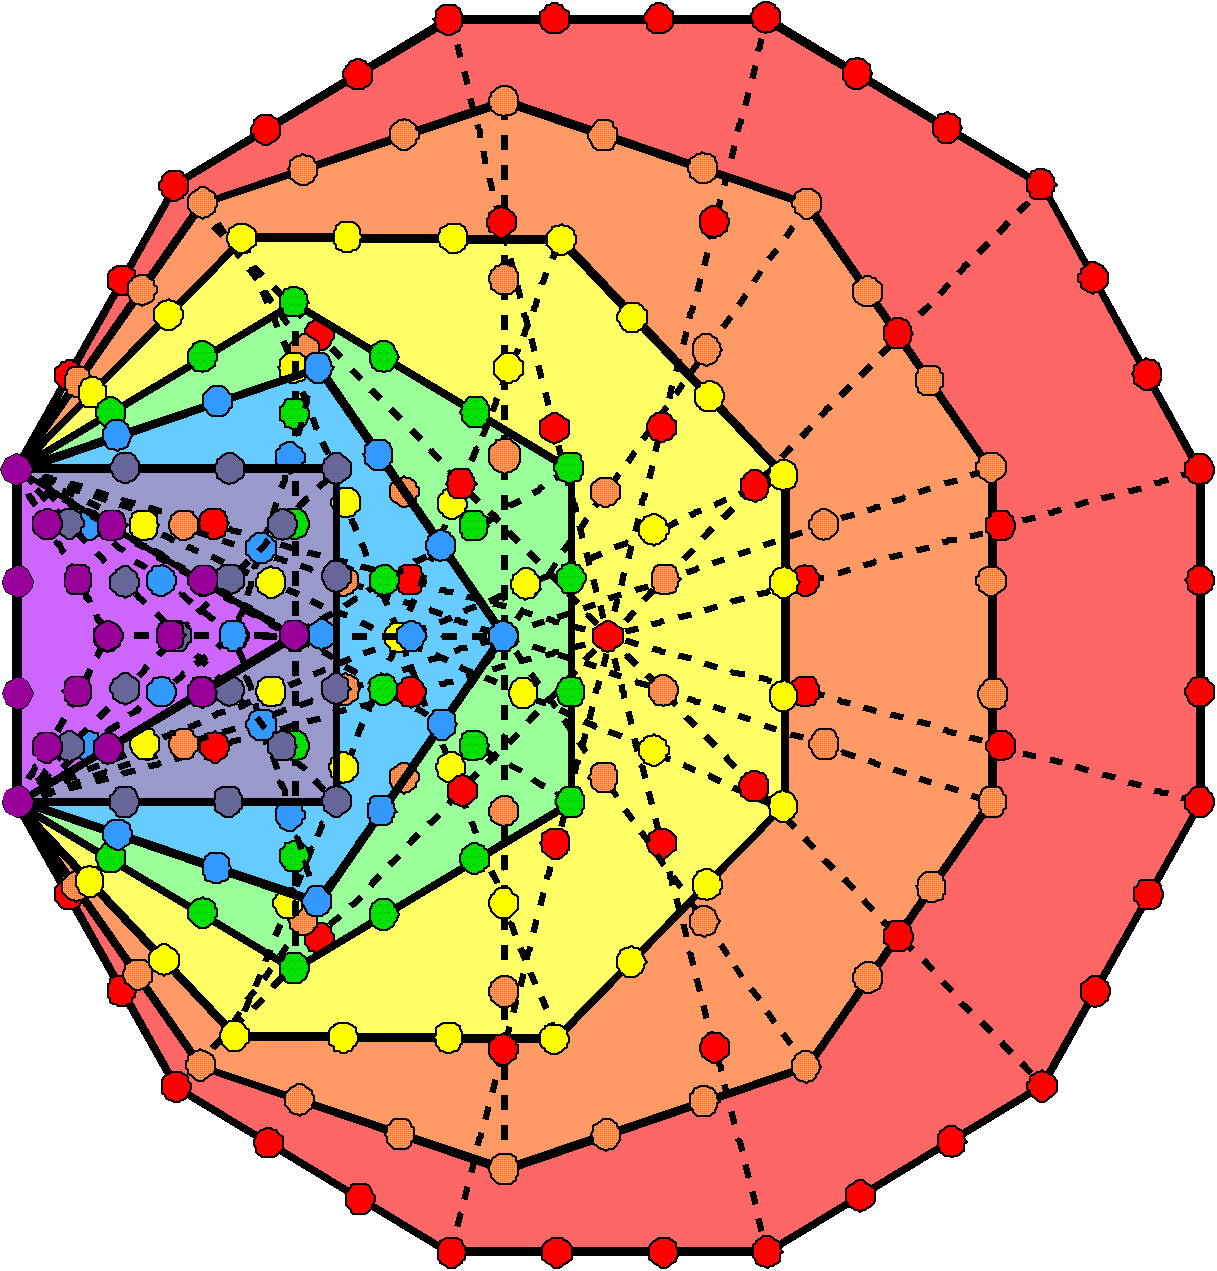 217 yods on sides of 47 tetractyses in 7 enfolded polygons